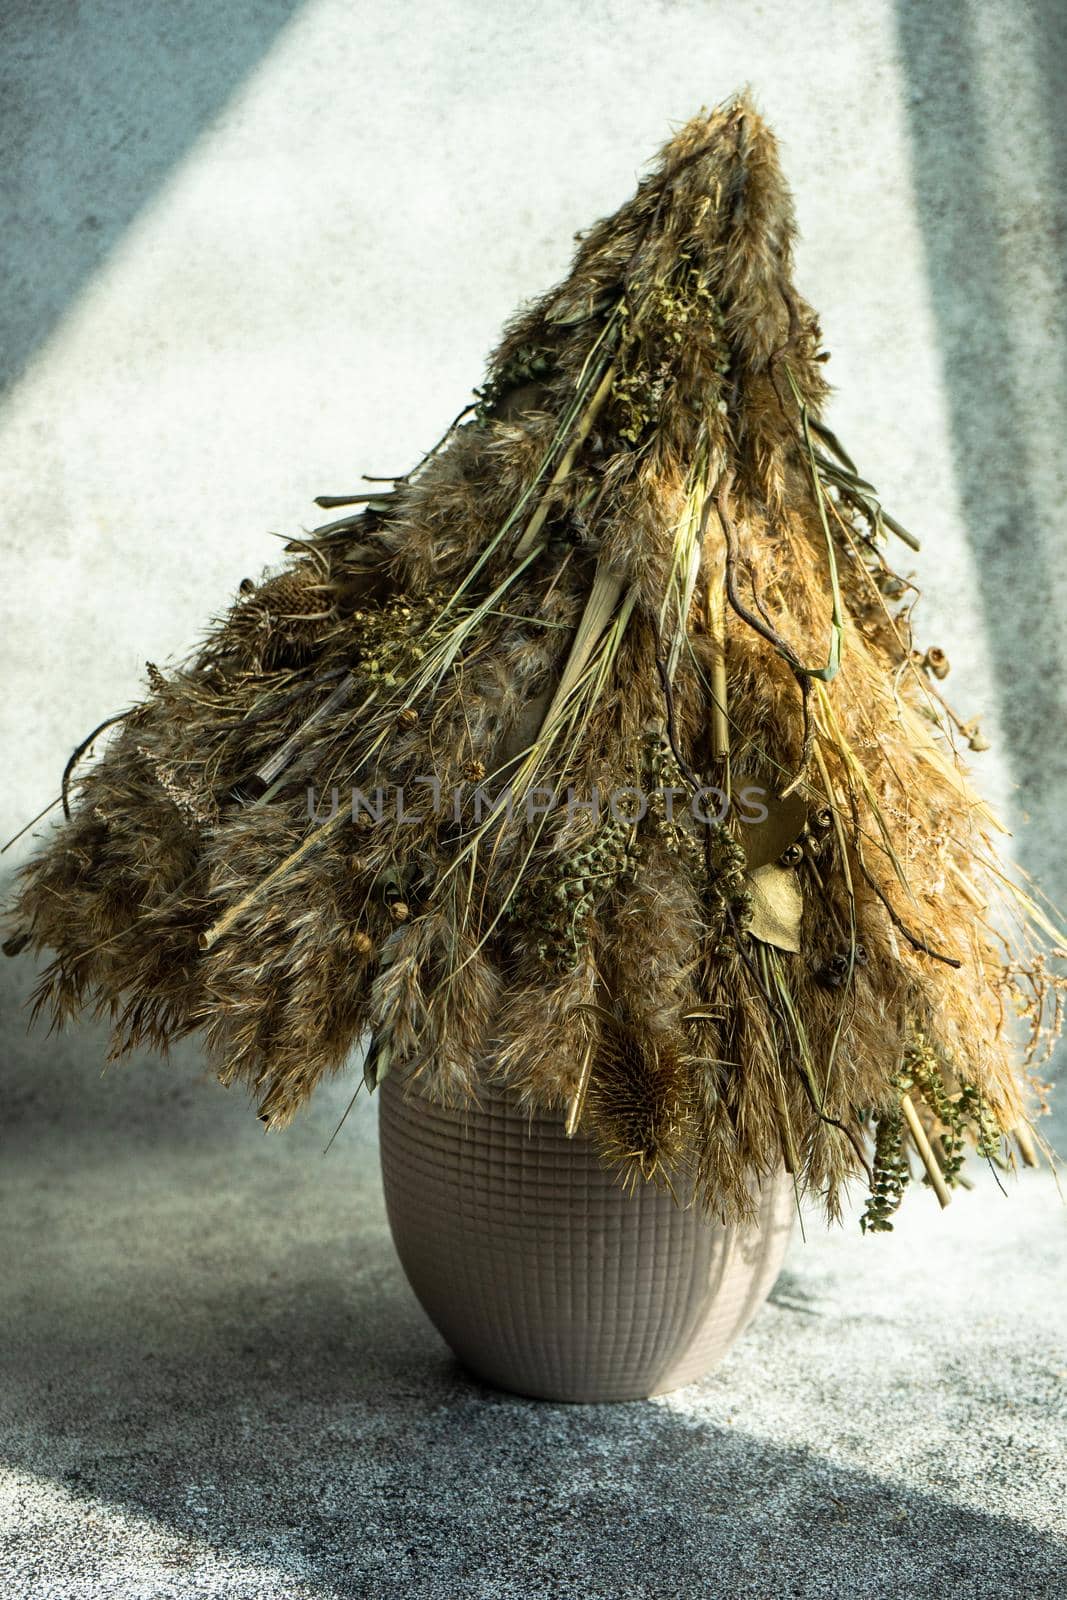 Christmas interior decoration with xmas tree made with dry grass, branches and leaves